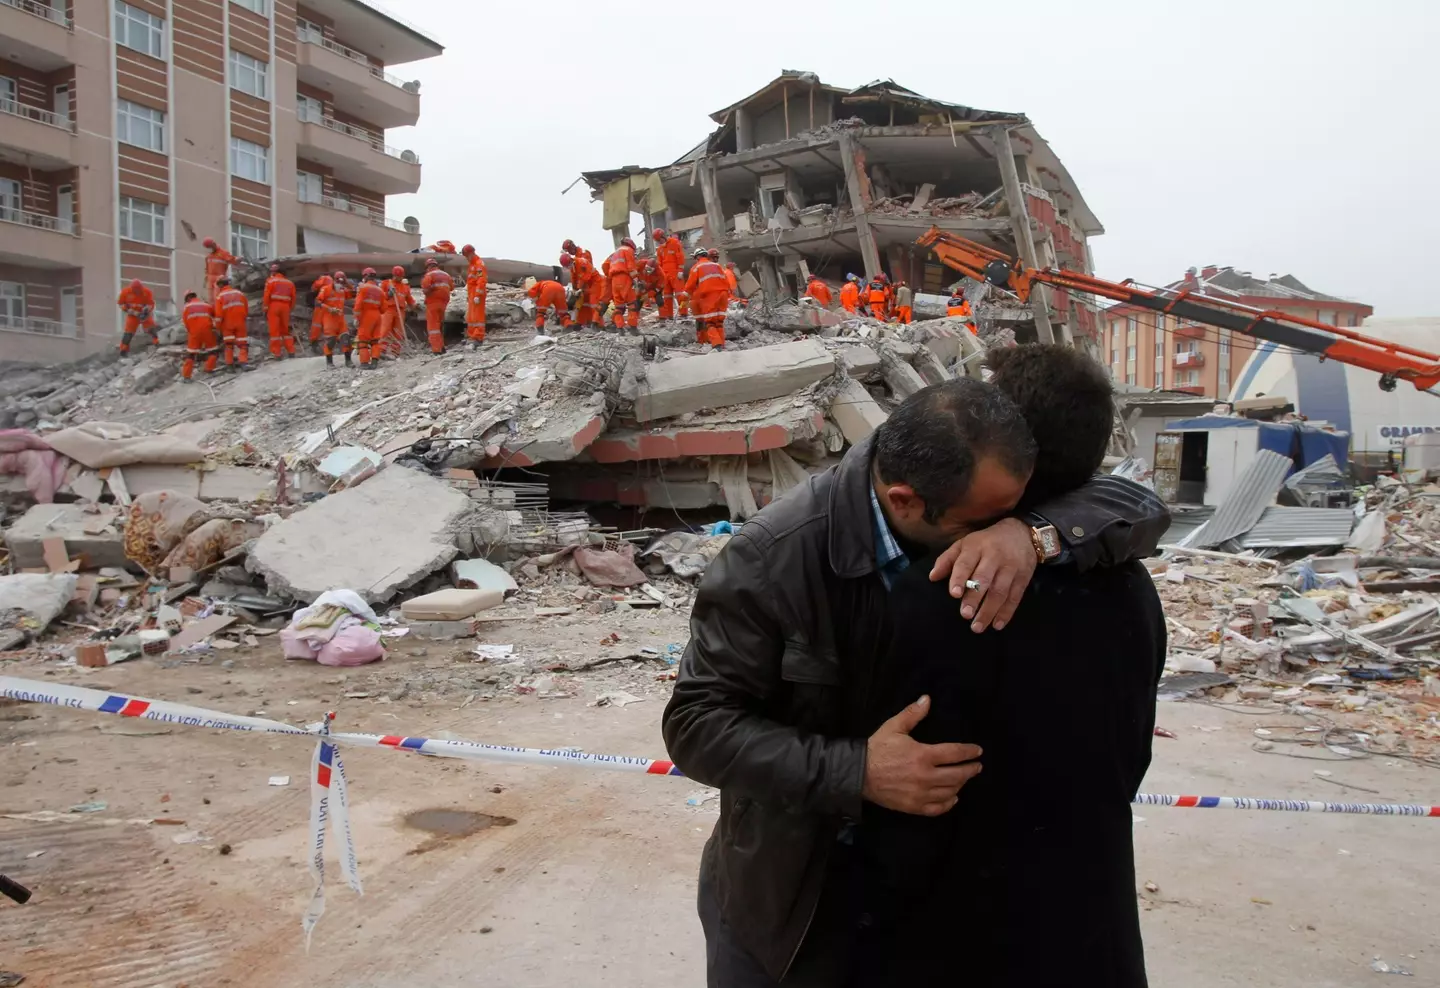 Rescuers have been working to find people trapped under rubble.